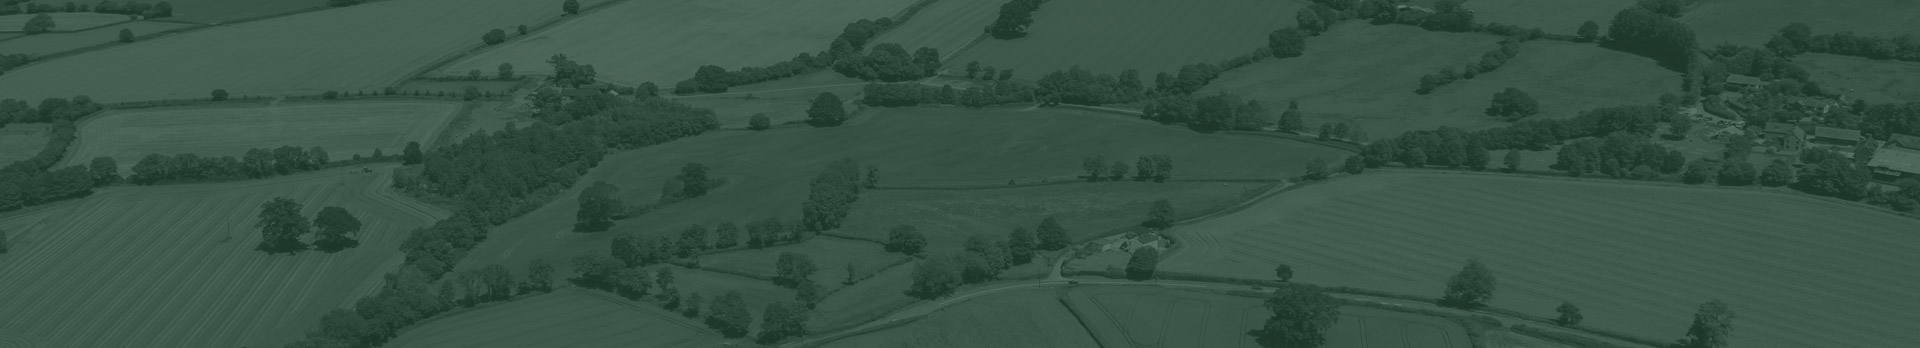 INDUSTRY EXPERTS EXPLORED THE LATEST DEVELOPMENTS AND WHAT LIES AHEAD AT RURAL PLANNING 2021 ONLINE CONFERENCE